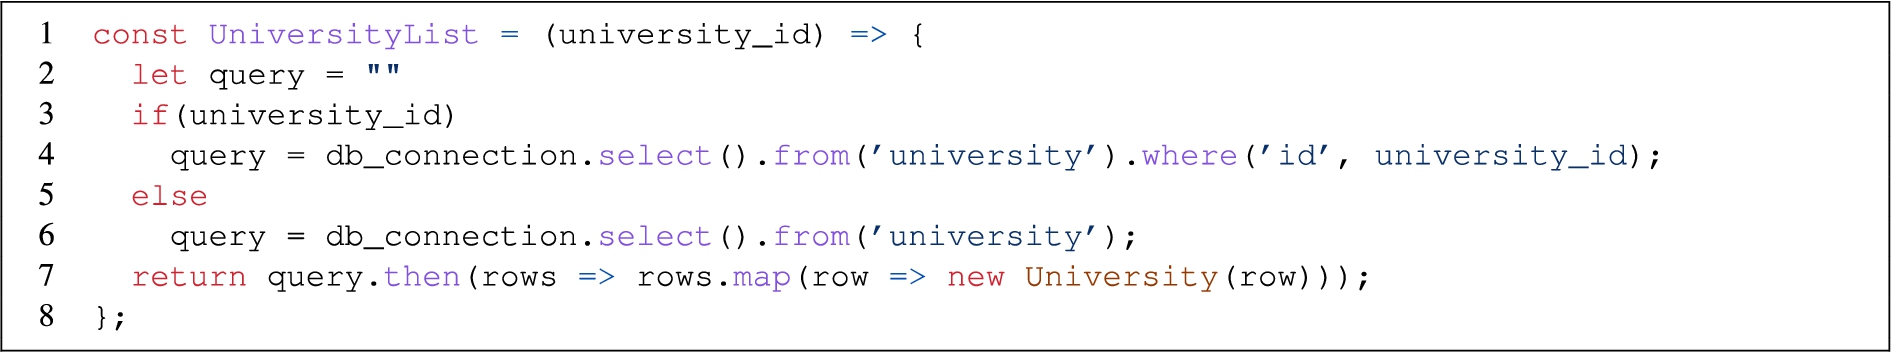 Example of a resolver function for the UniversityList field